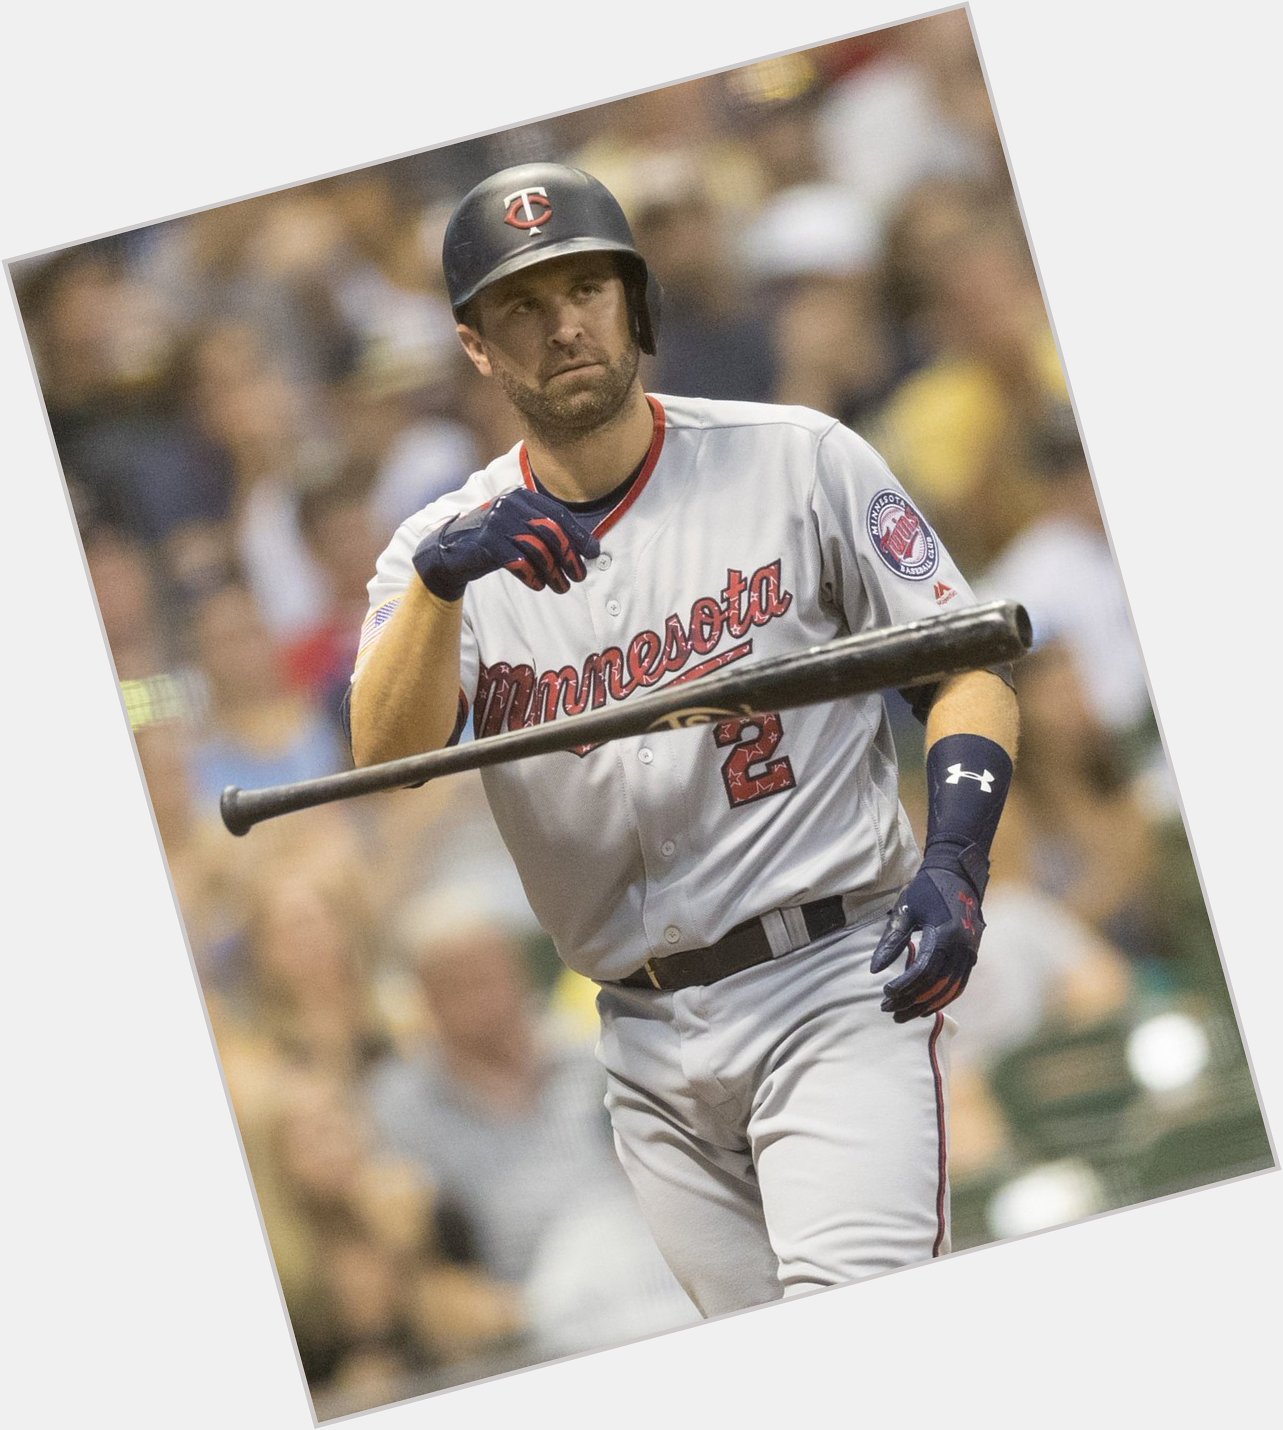 Happy Birthday to Brian Dozier, All Star and Gold Glove winner 